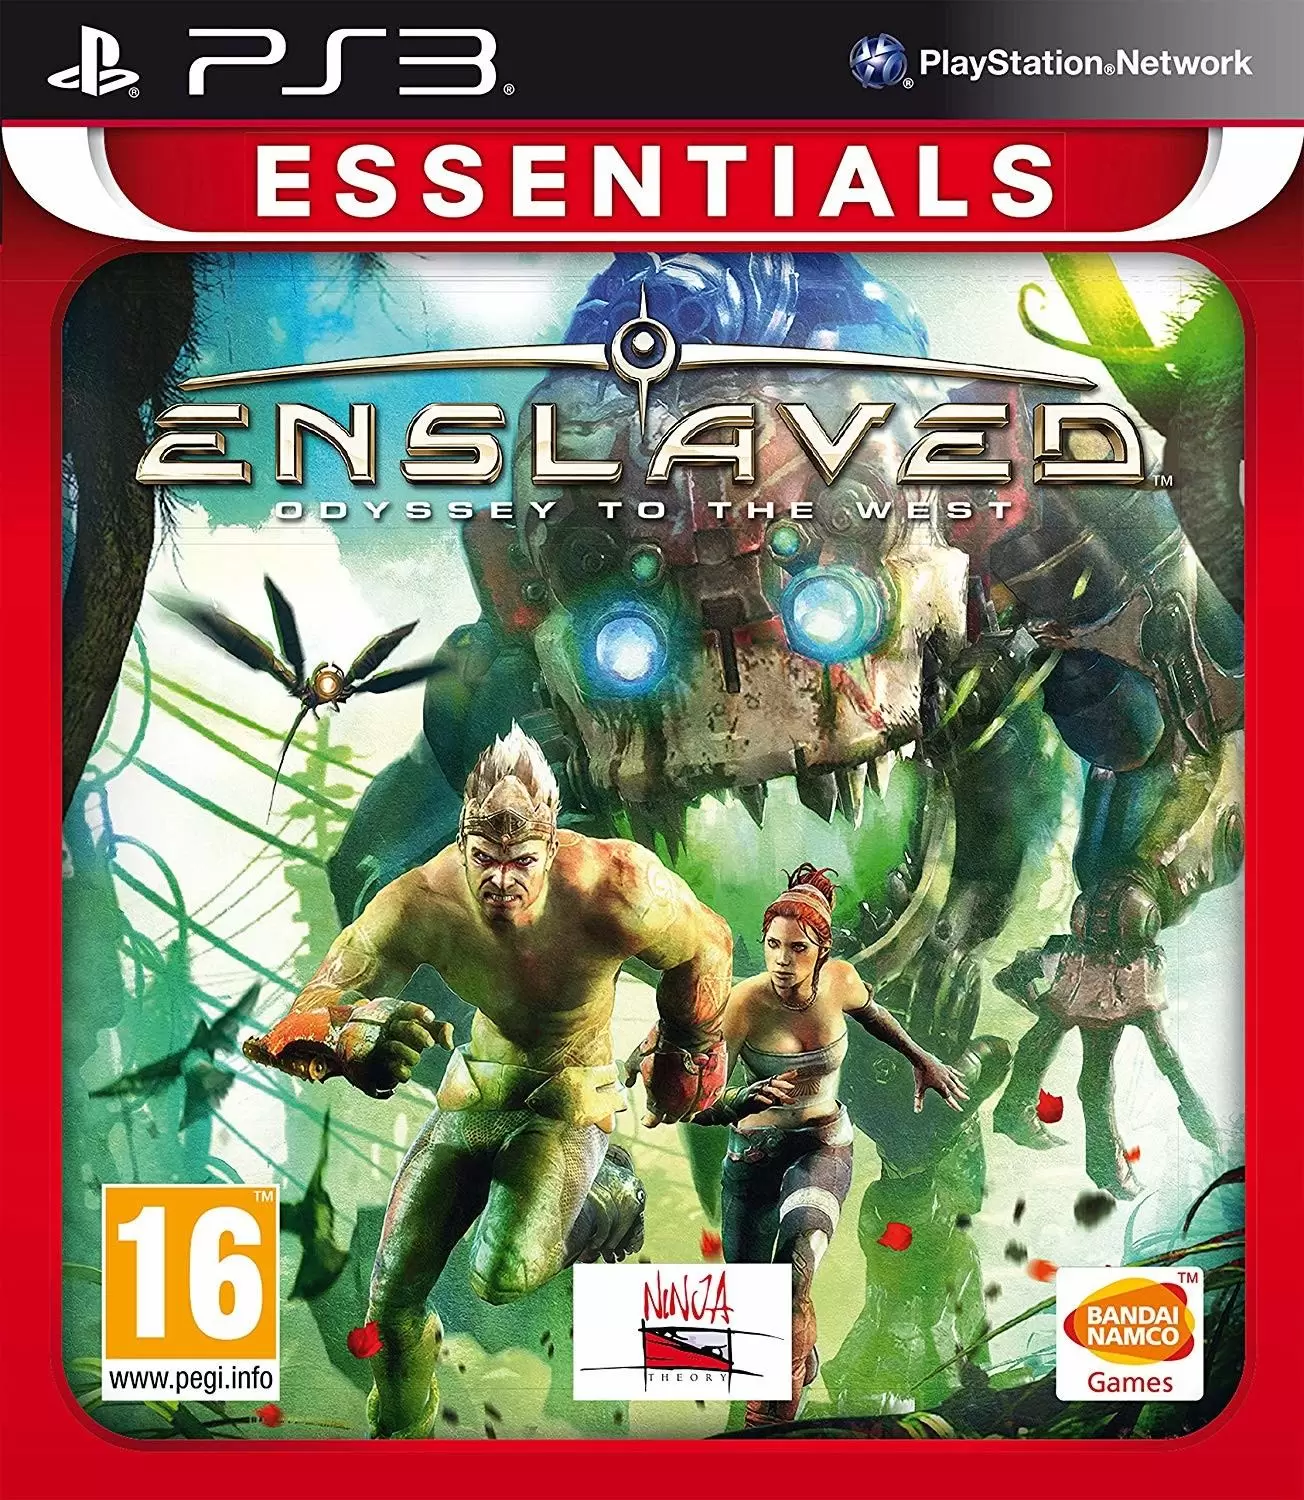 PS3 Games - Enslaved: Odyssey to the West (Essentials)